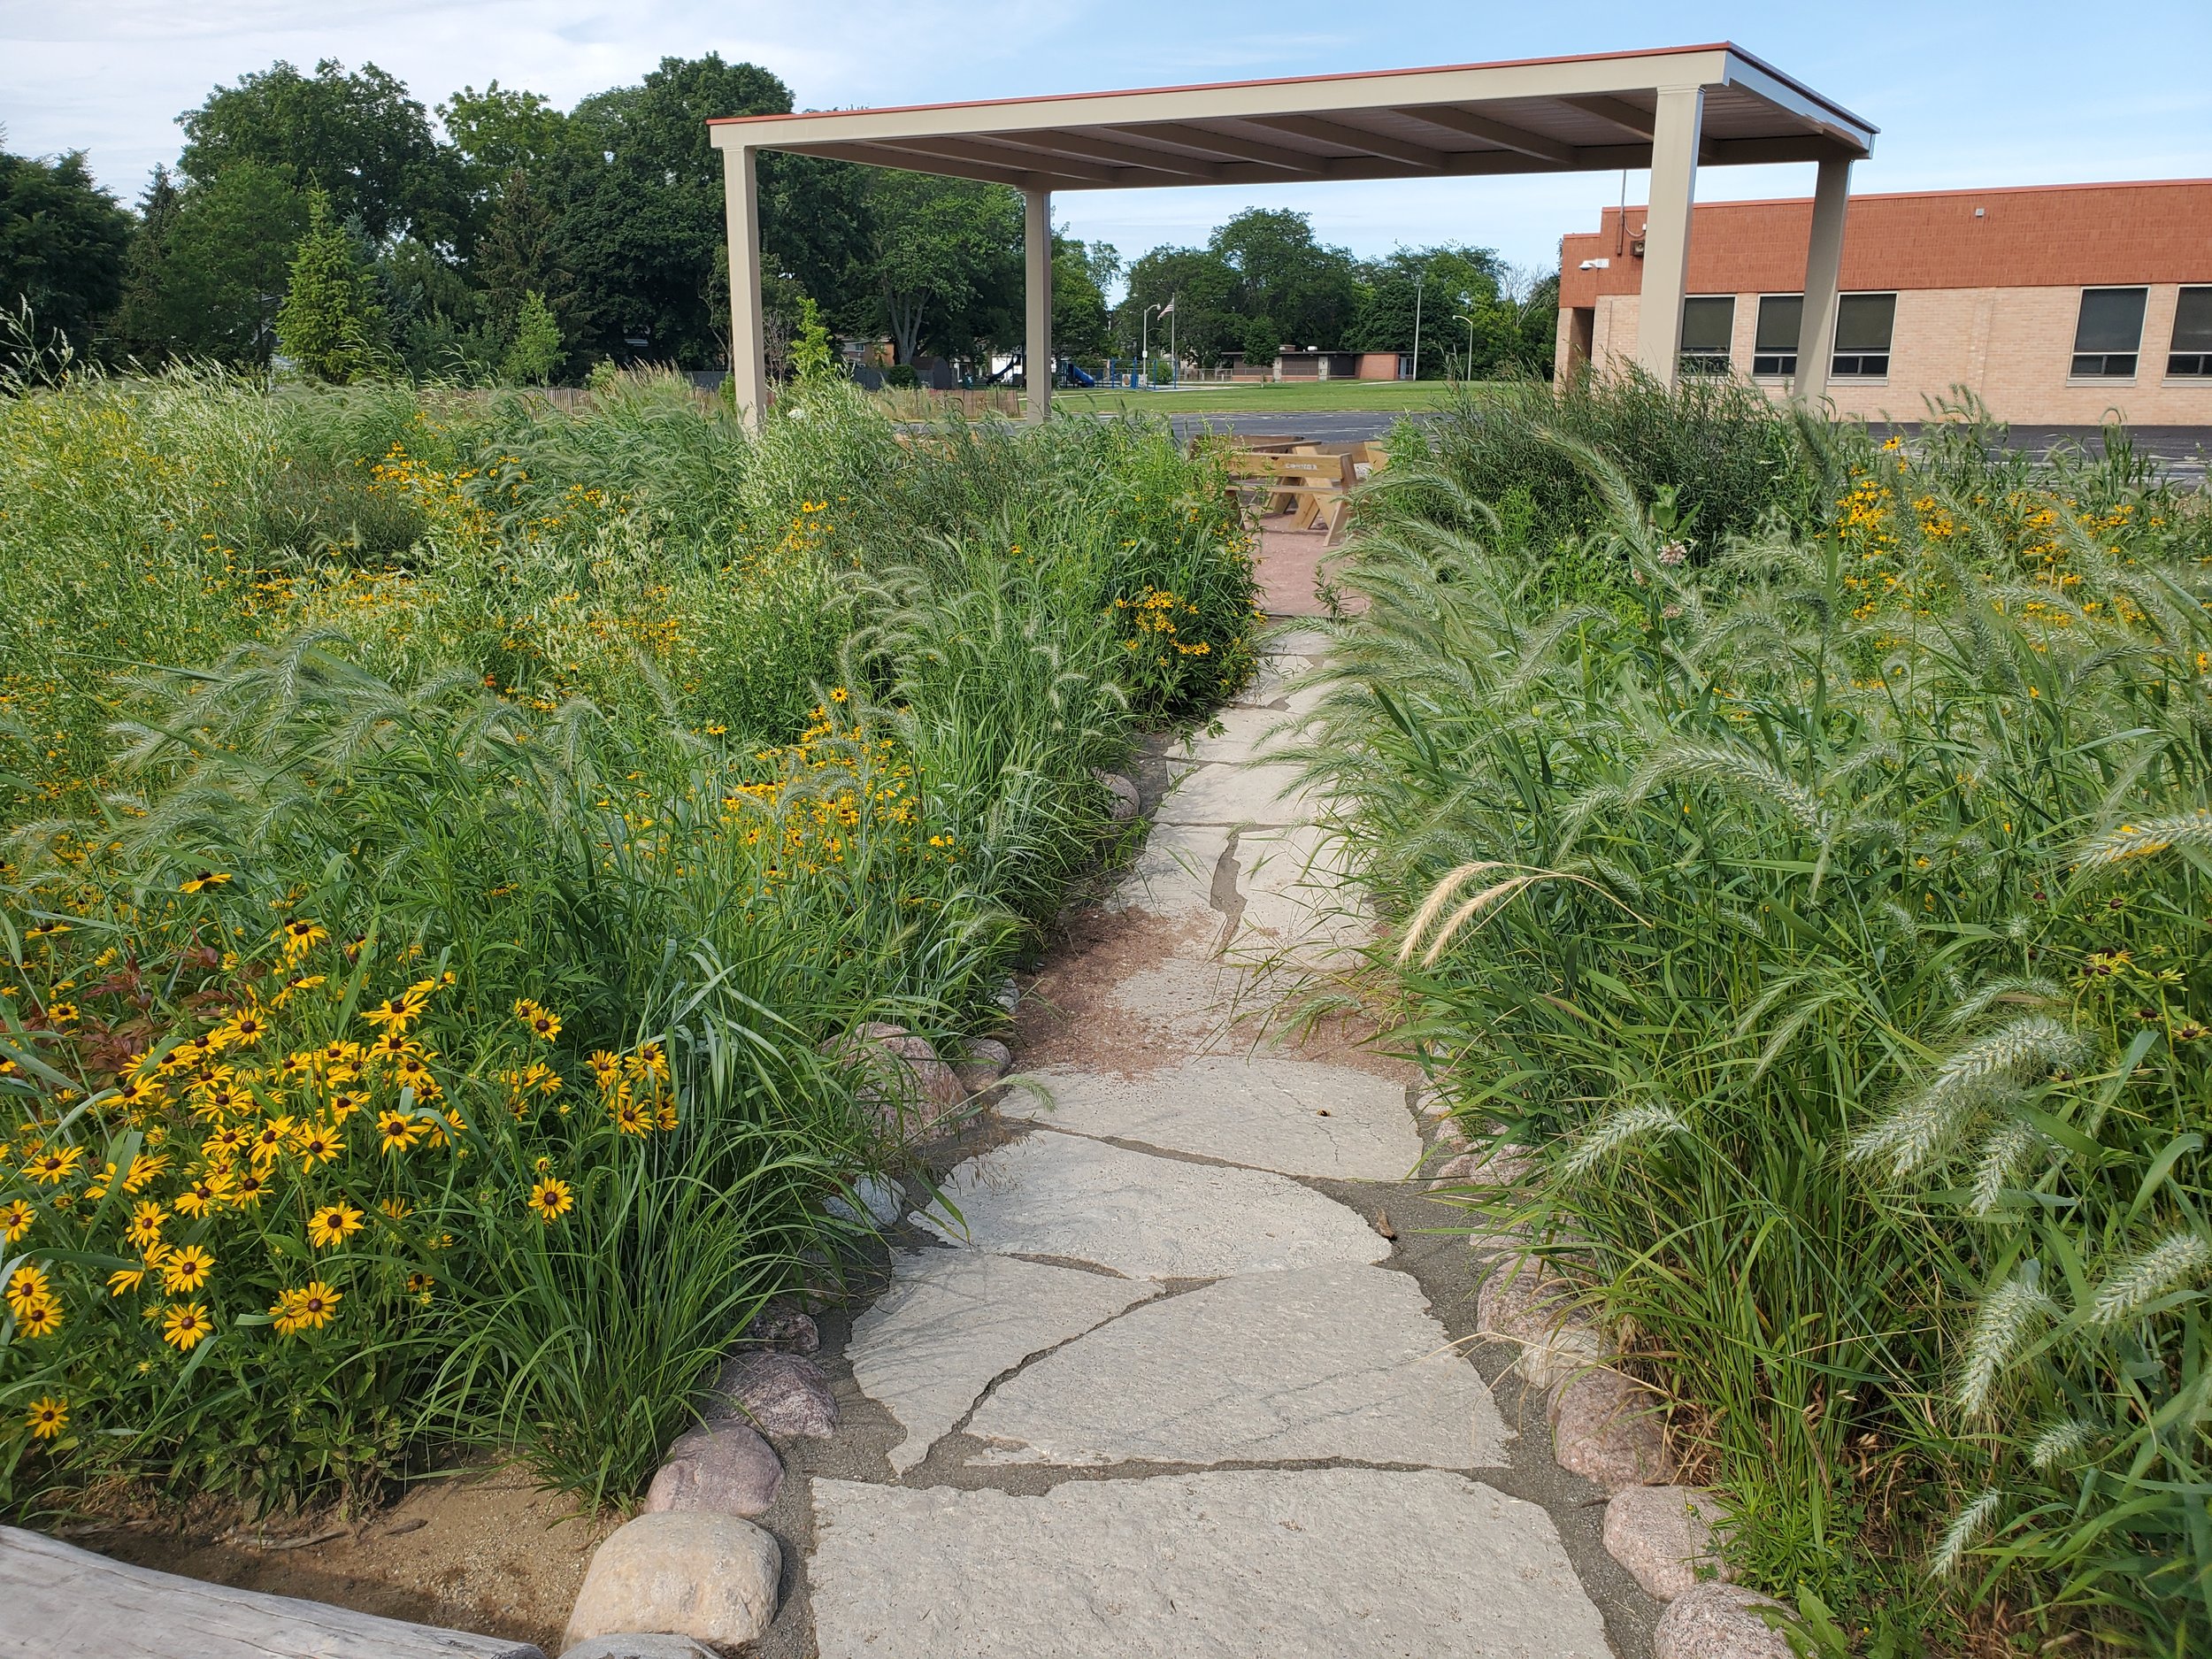 Bioswale and outdoor classroom at a redeveloped schoolyard